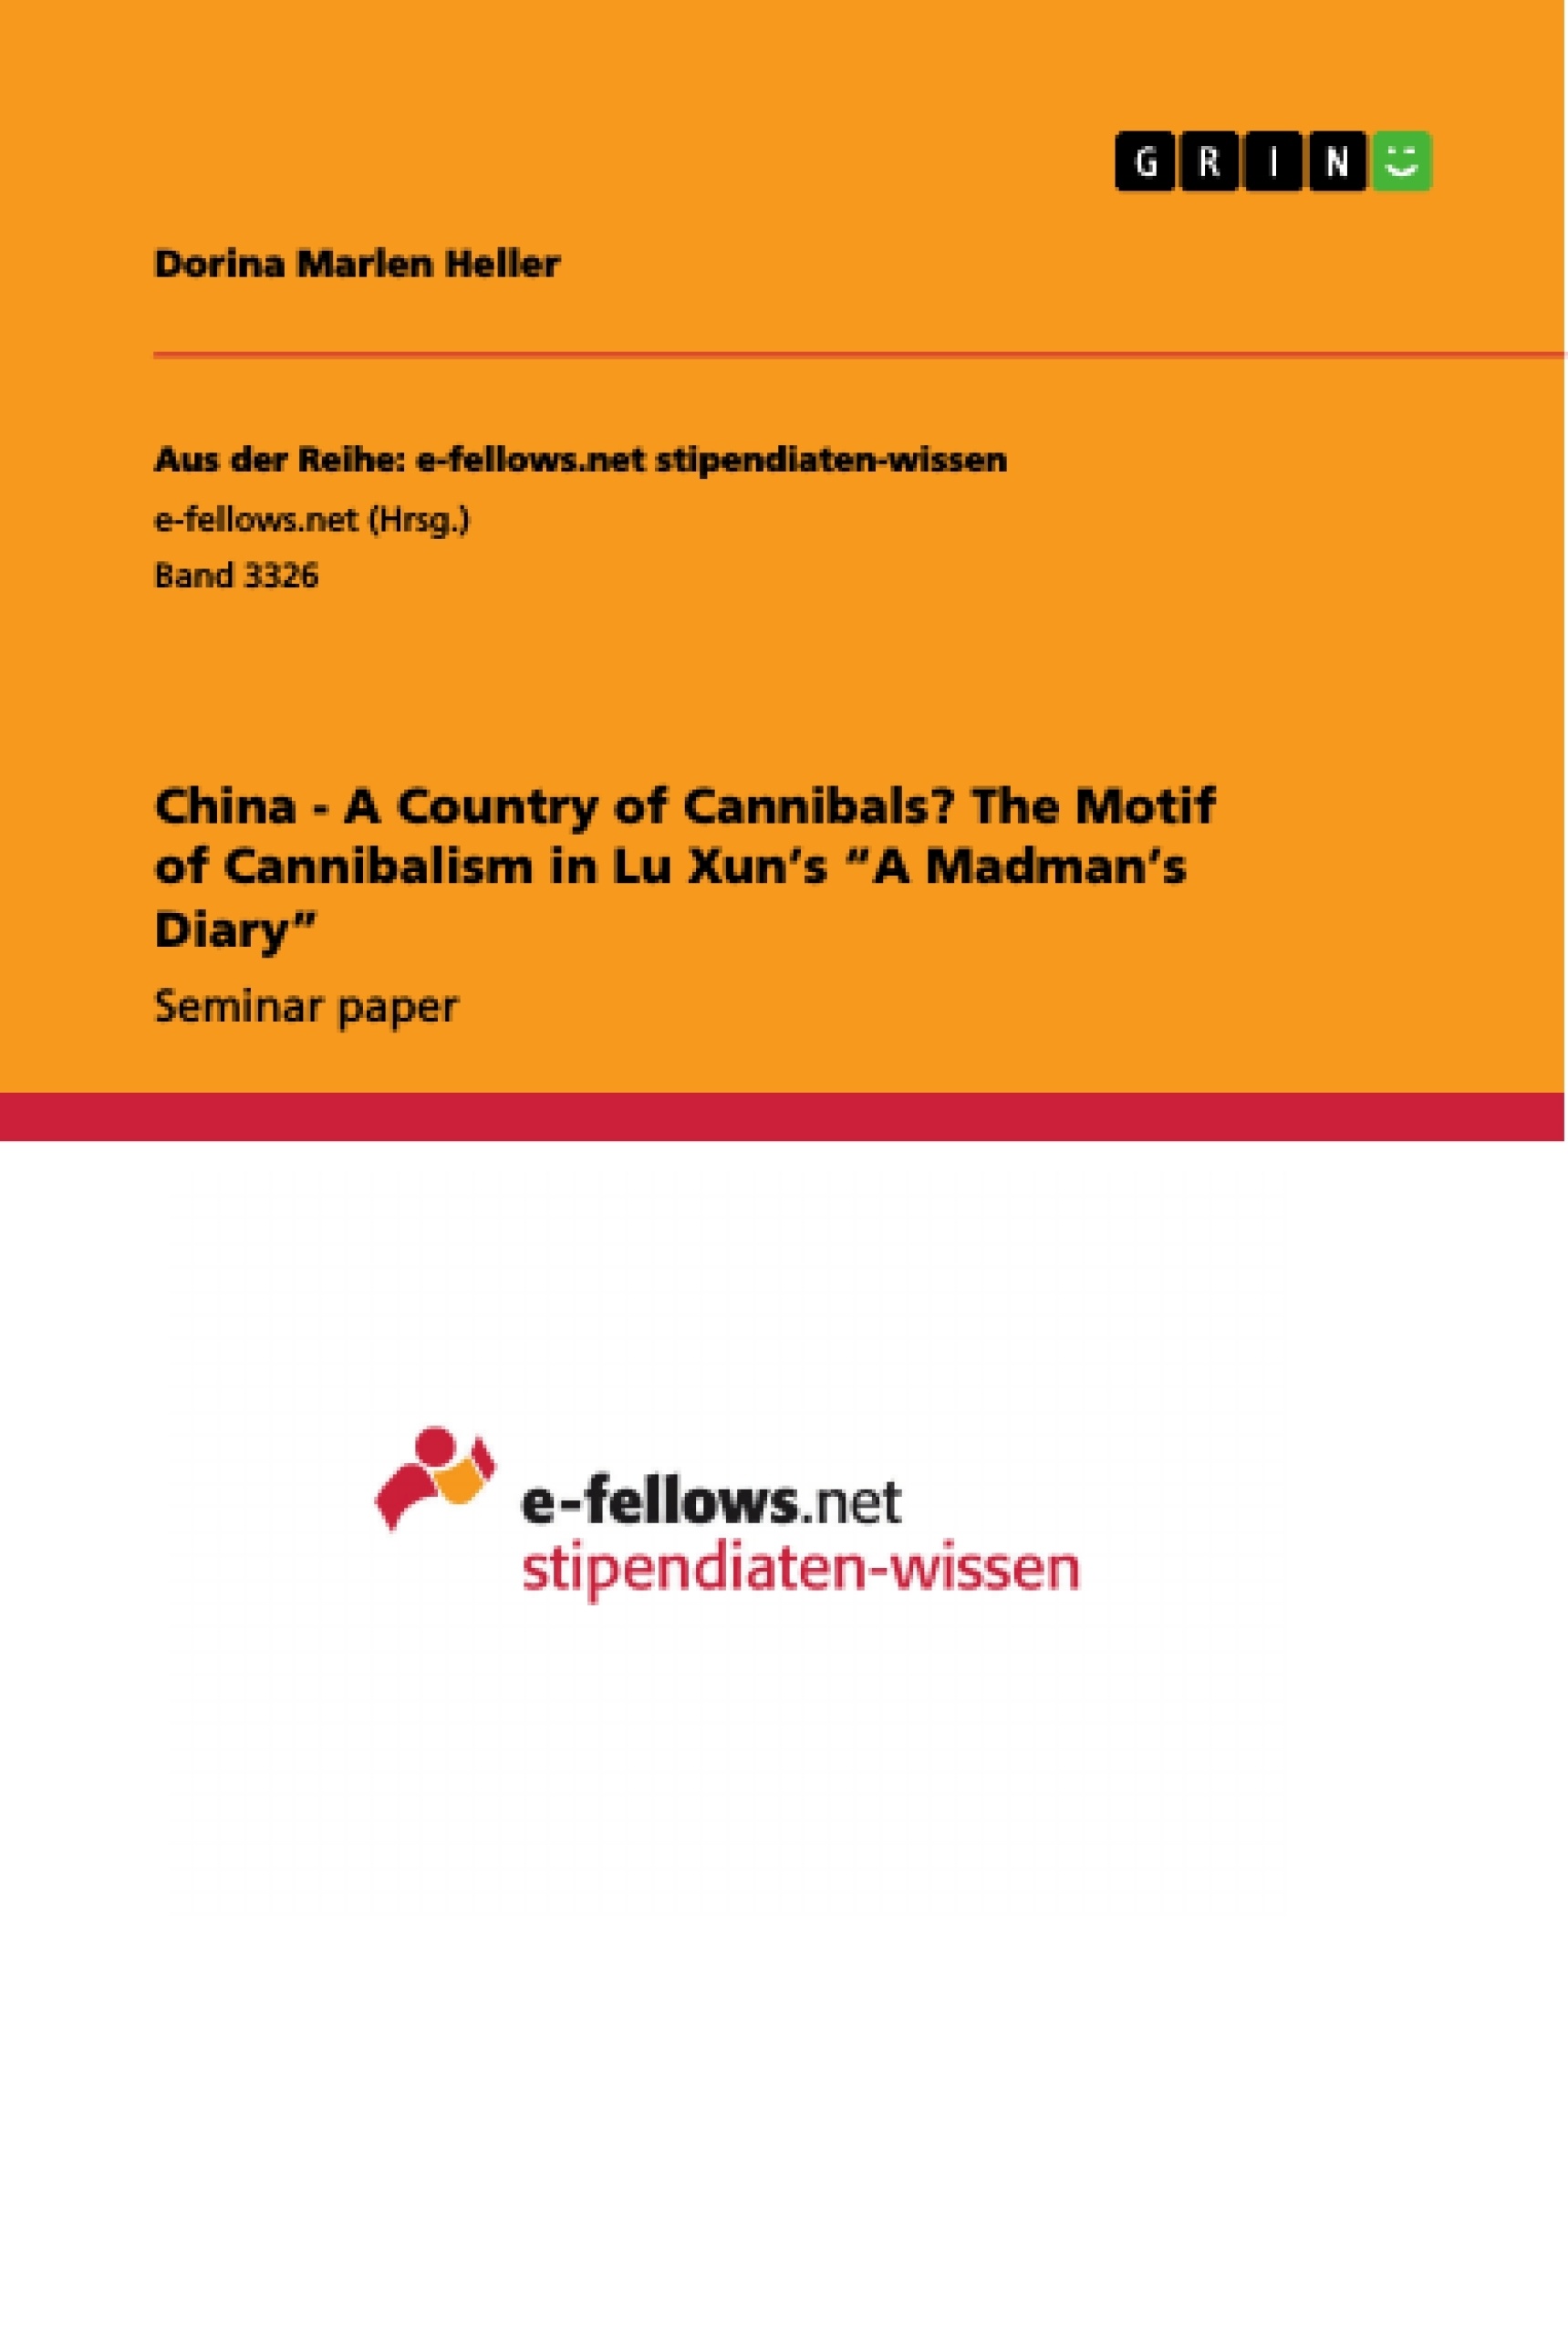 Título: China - A Country of Cannibals? The Motif of Cannibalism in Lu Xun’s “A Madman’s Diary”